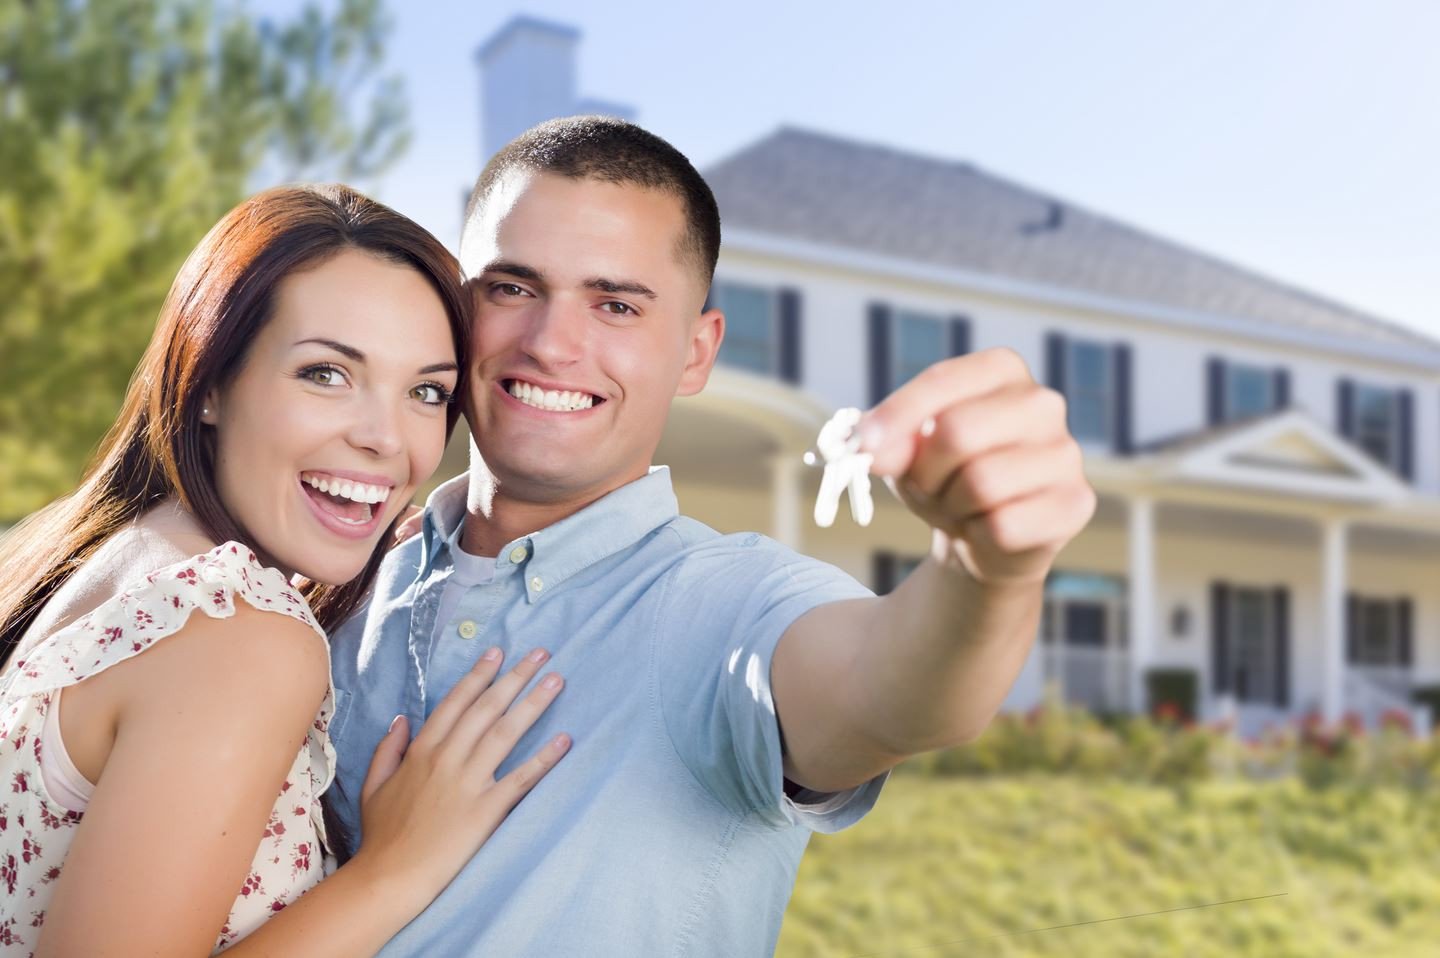 https://www.hrccu.org/wp-content/uploads/2020/05/Are-You-a-New-Home-Buyer-1.jpg